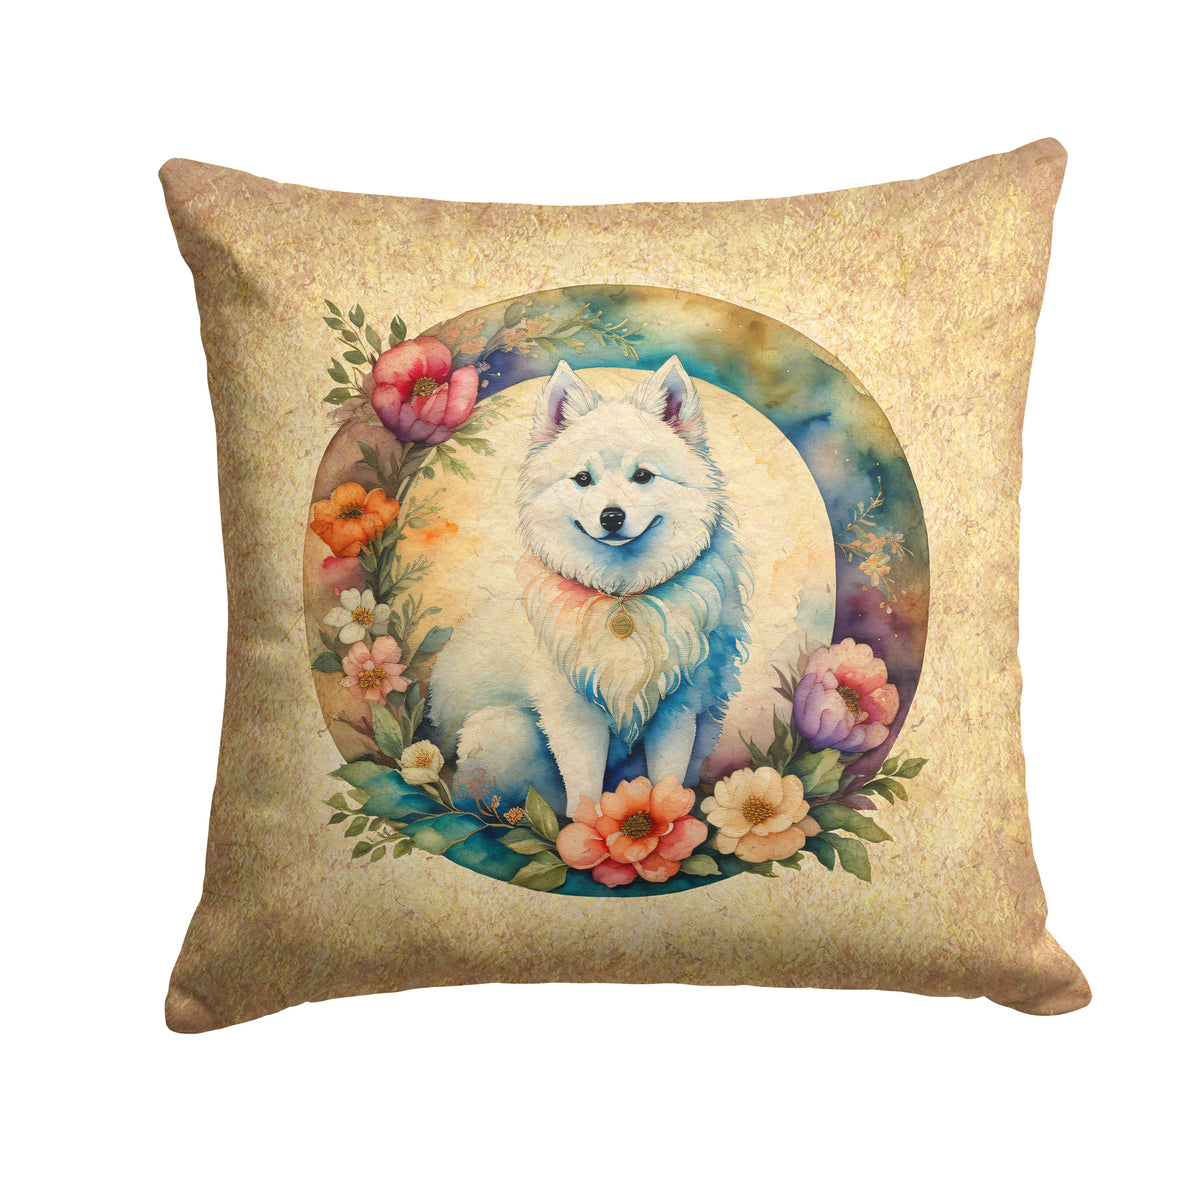 Buy this American Eskimo and Flowers Fabric Decorative Pillow